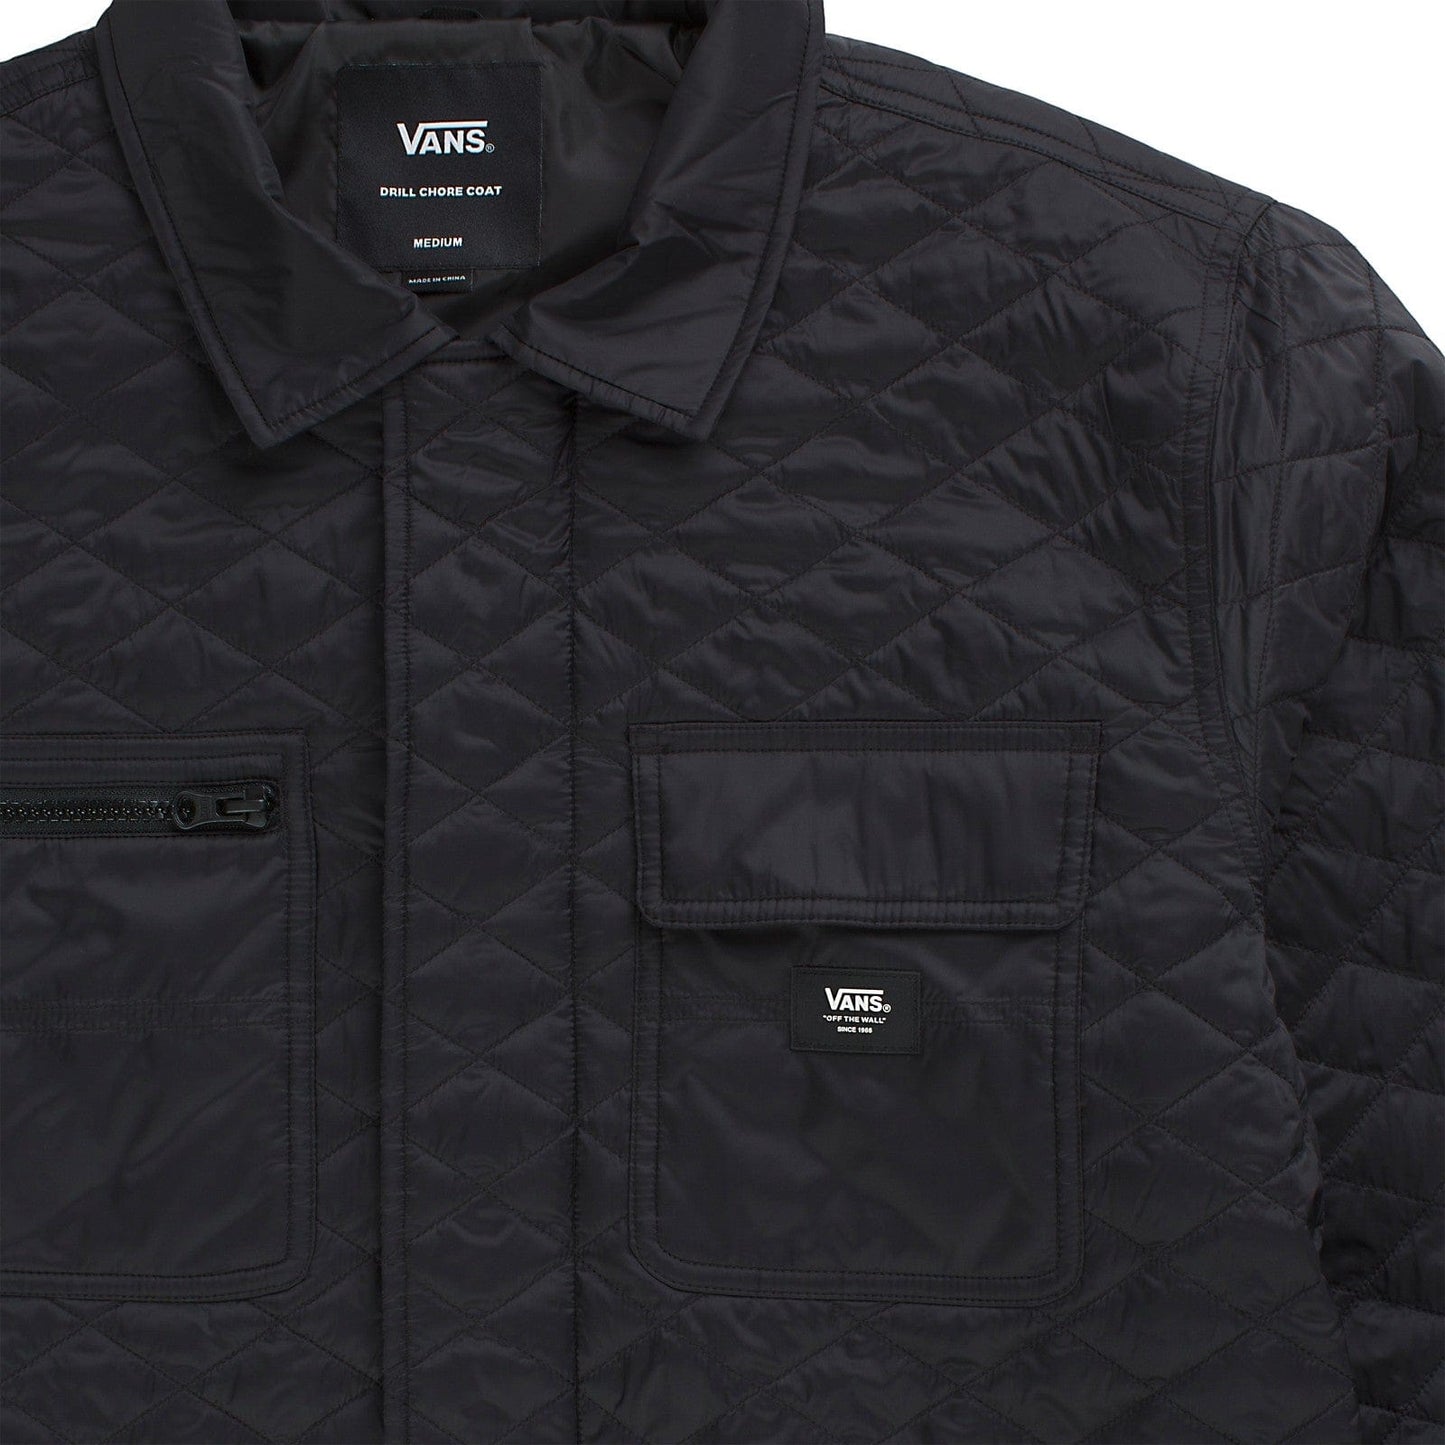 Vans | Drill Chore Coat - Thermoball MTE-1 - Black